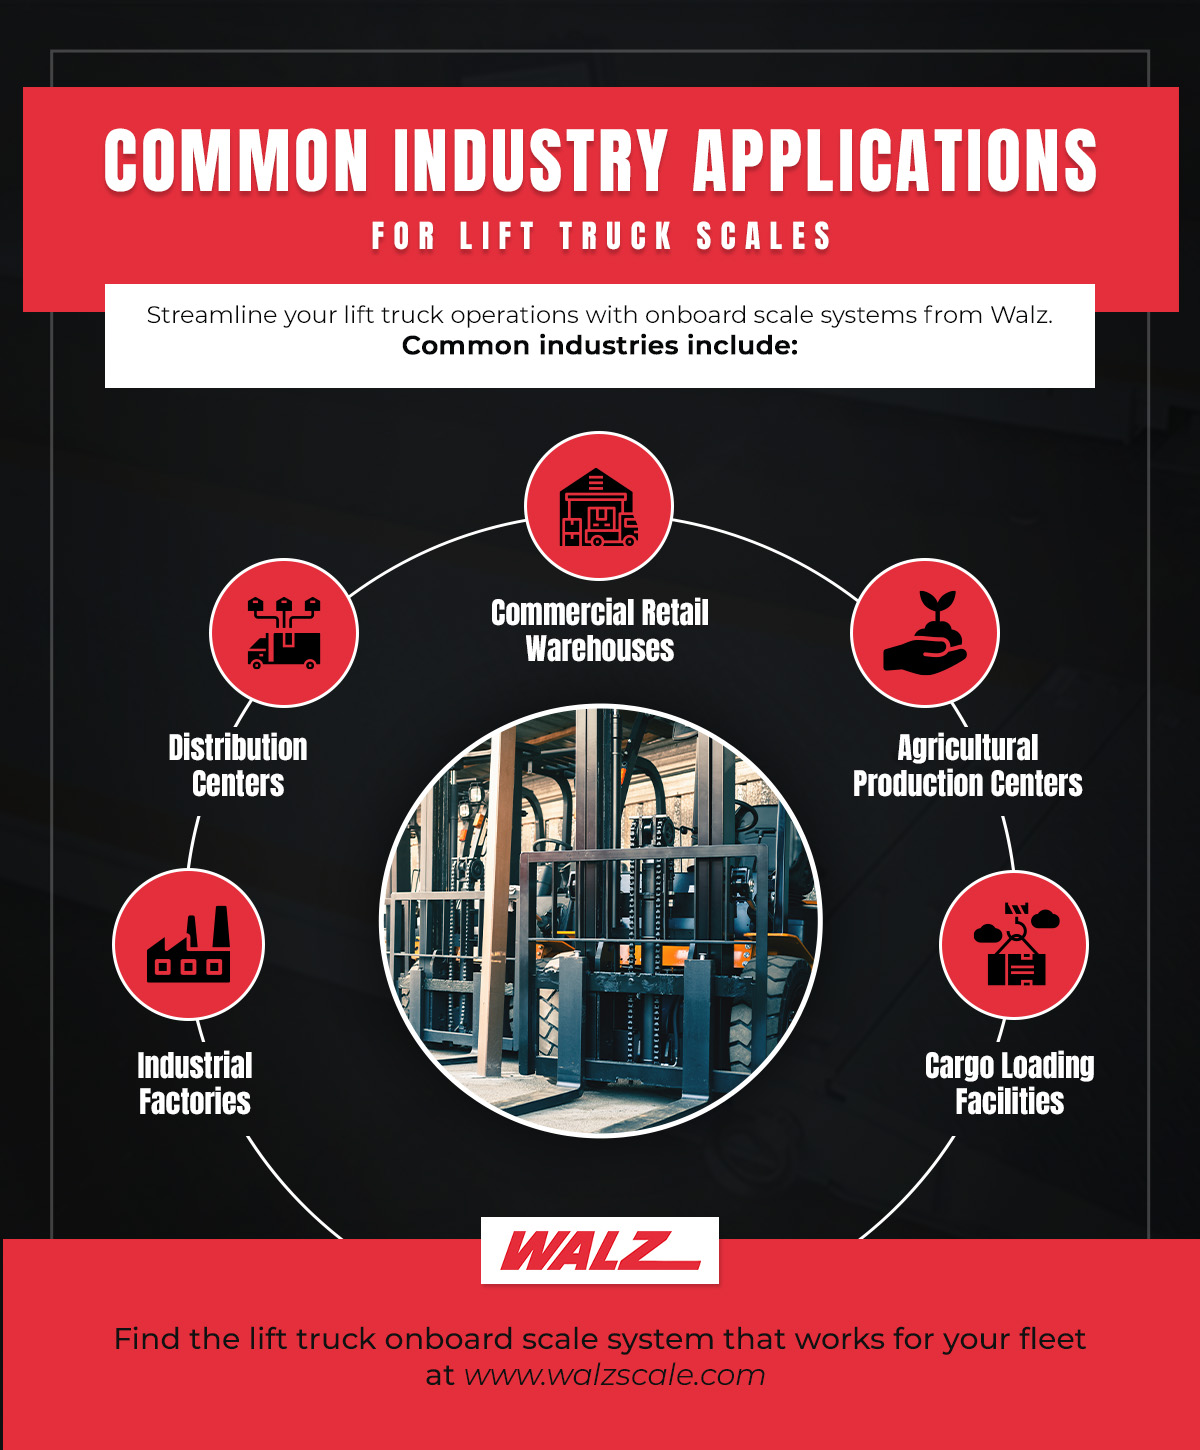 RV-2021-04-19_Common Industry Applications for Lift Truck Drivers